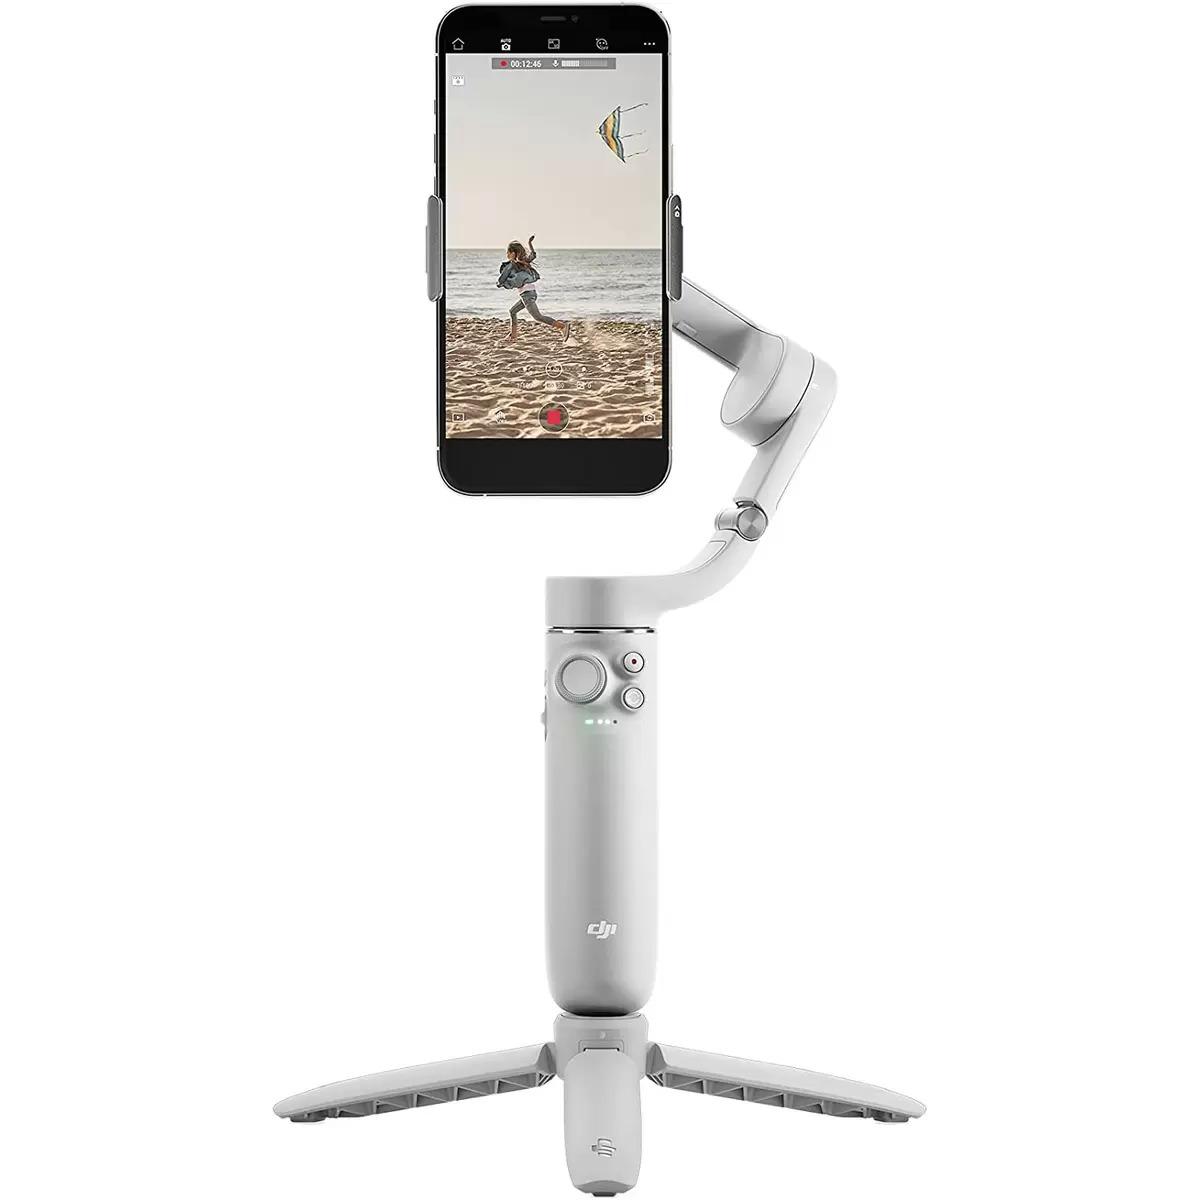 DJI OM 5 Smartphone 3-Axis Gimbal Stabilizer for $129 Shipped